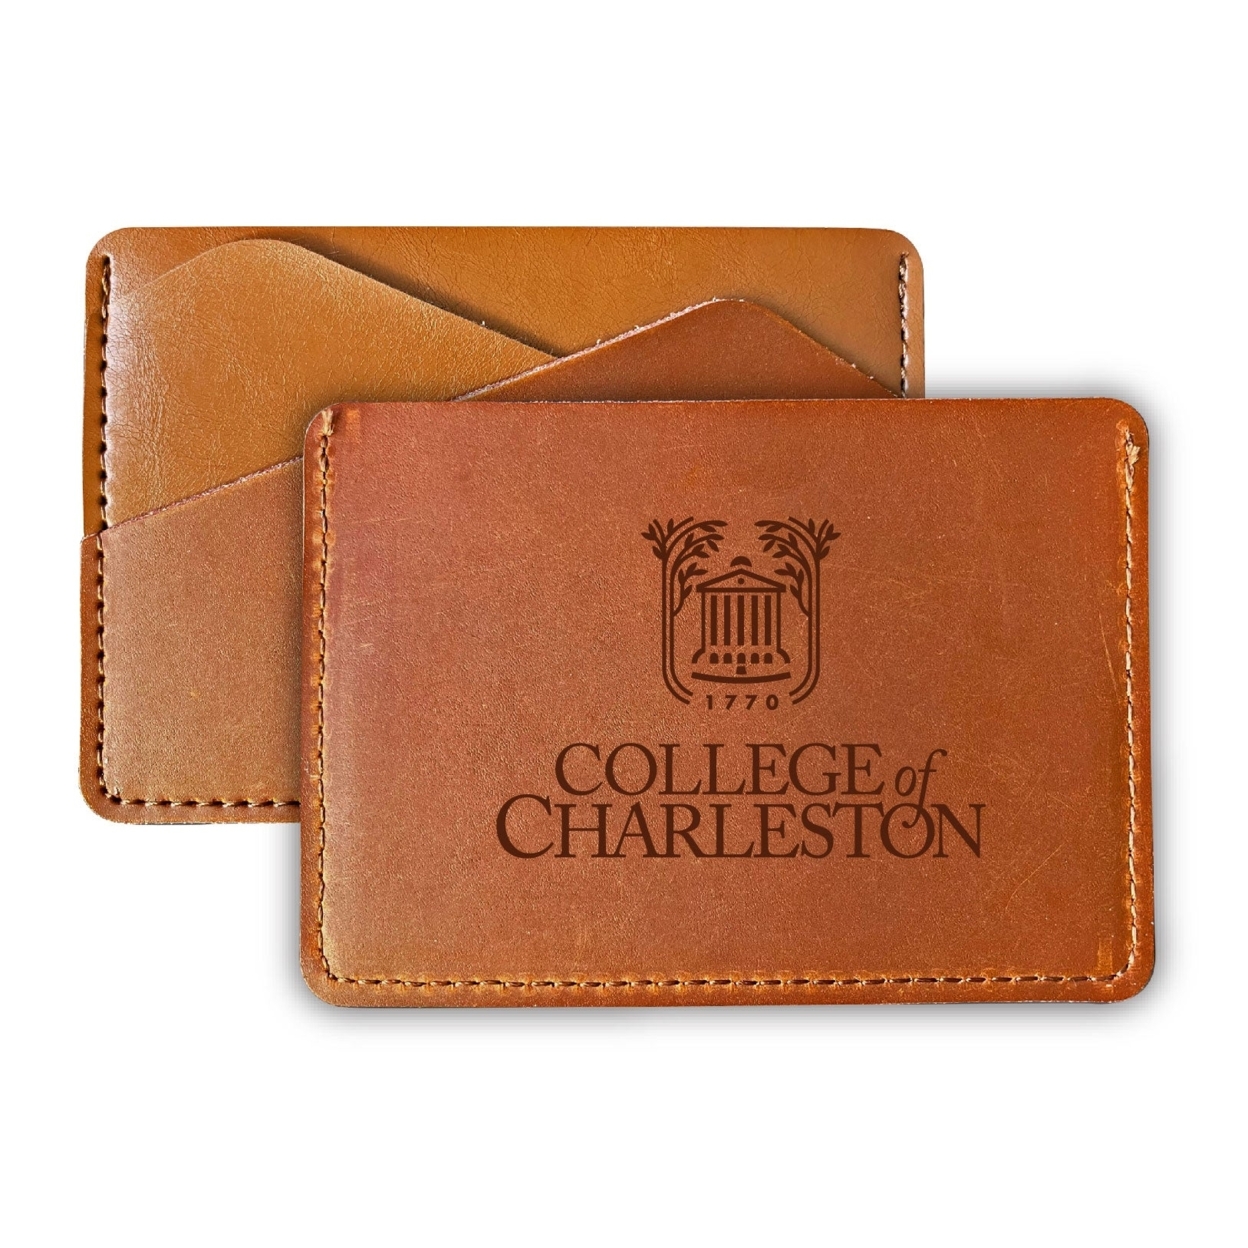 College Of Charleston College Leather Card Holder Wallet